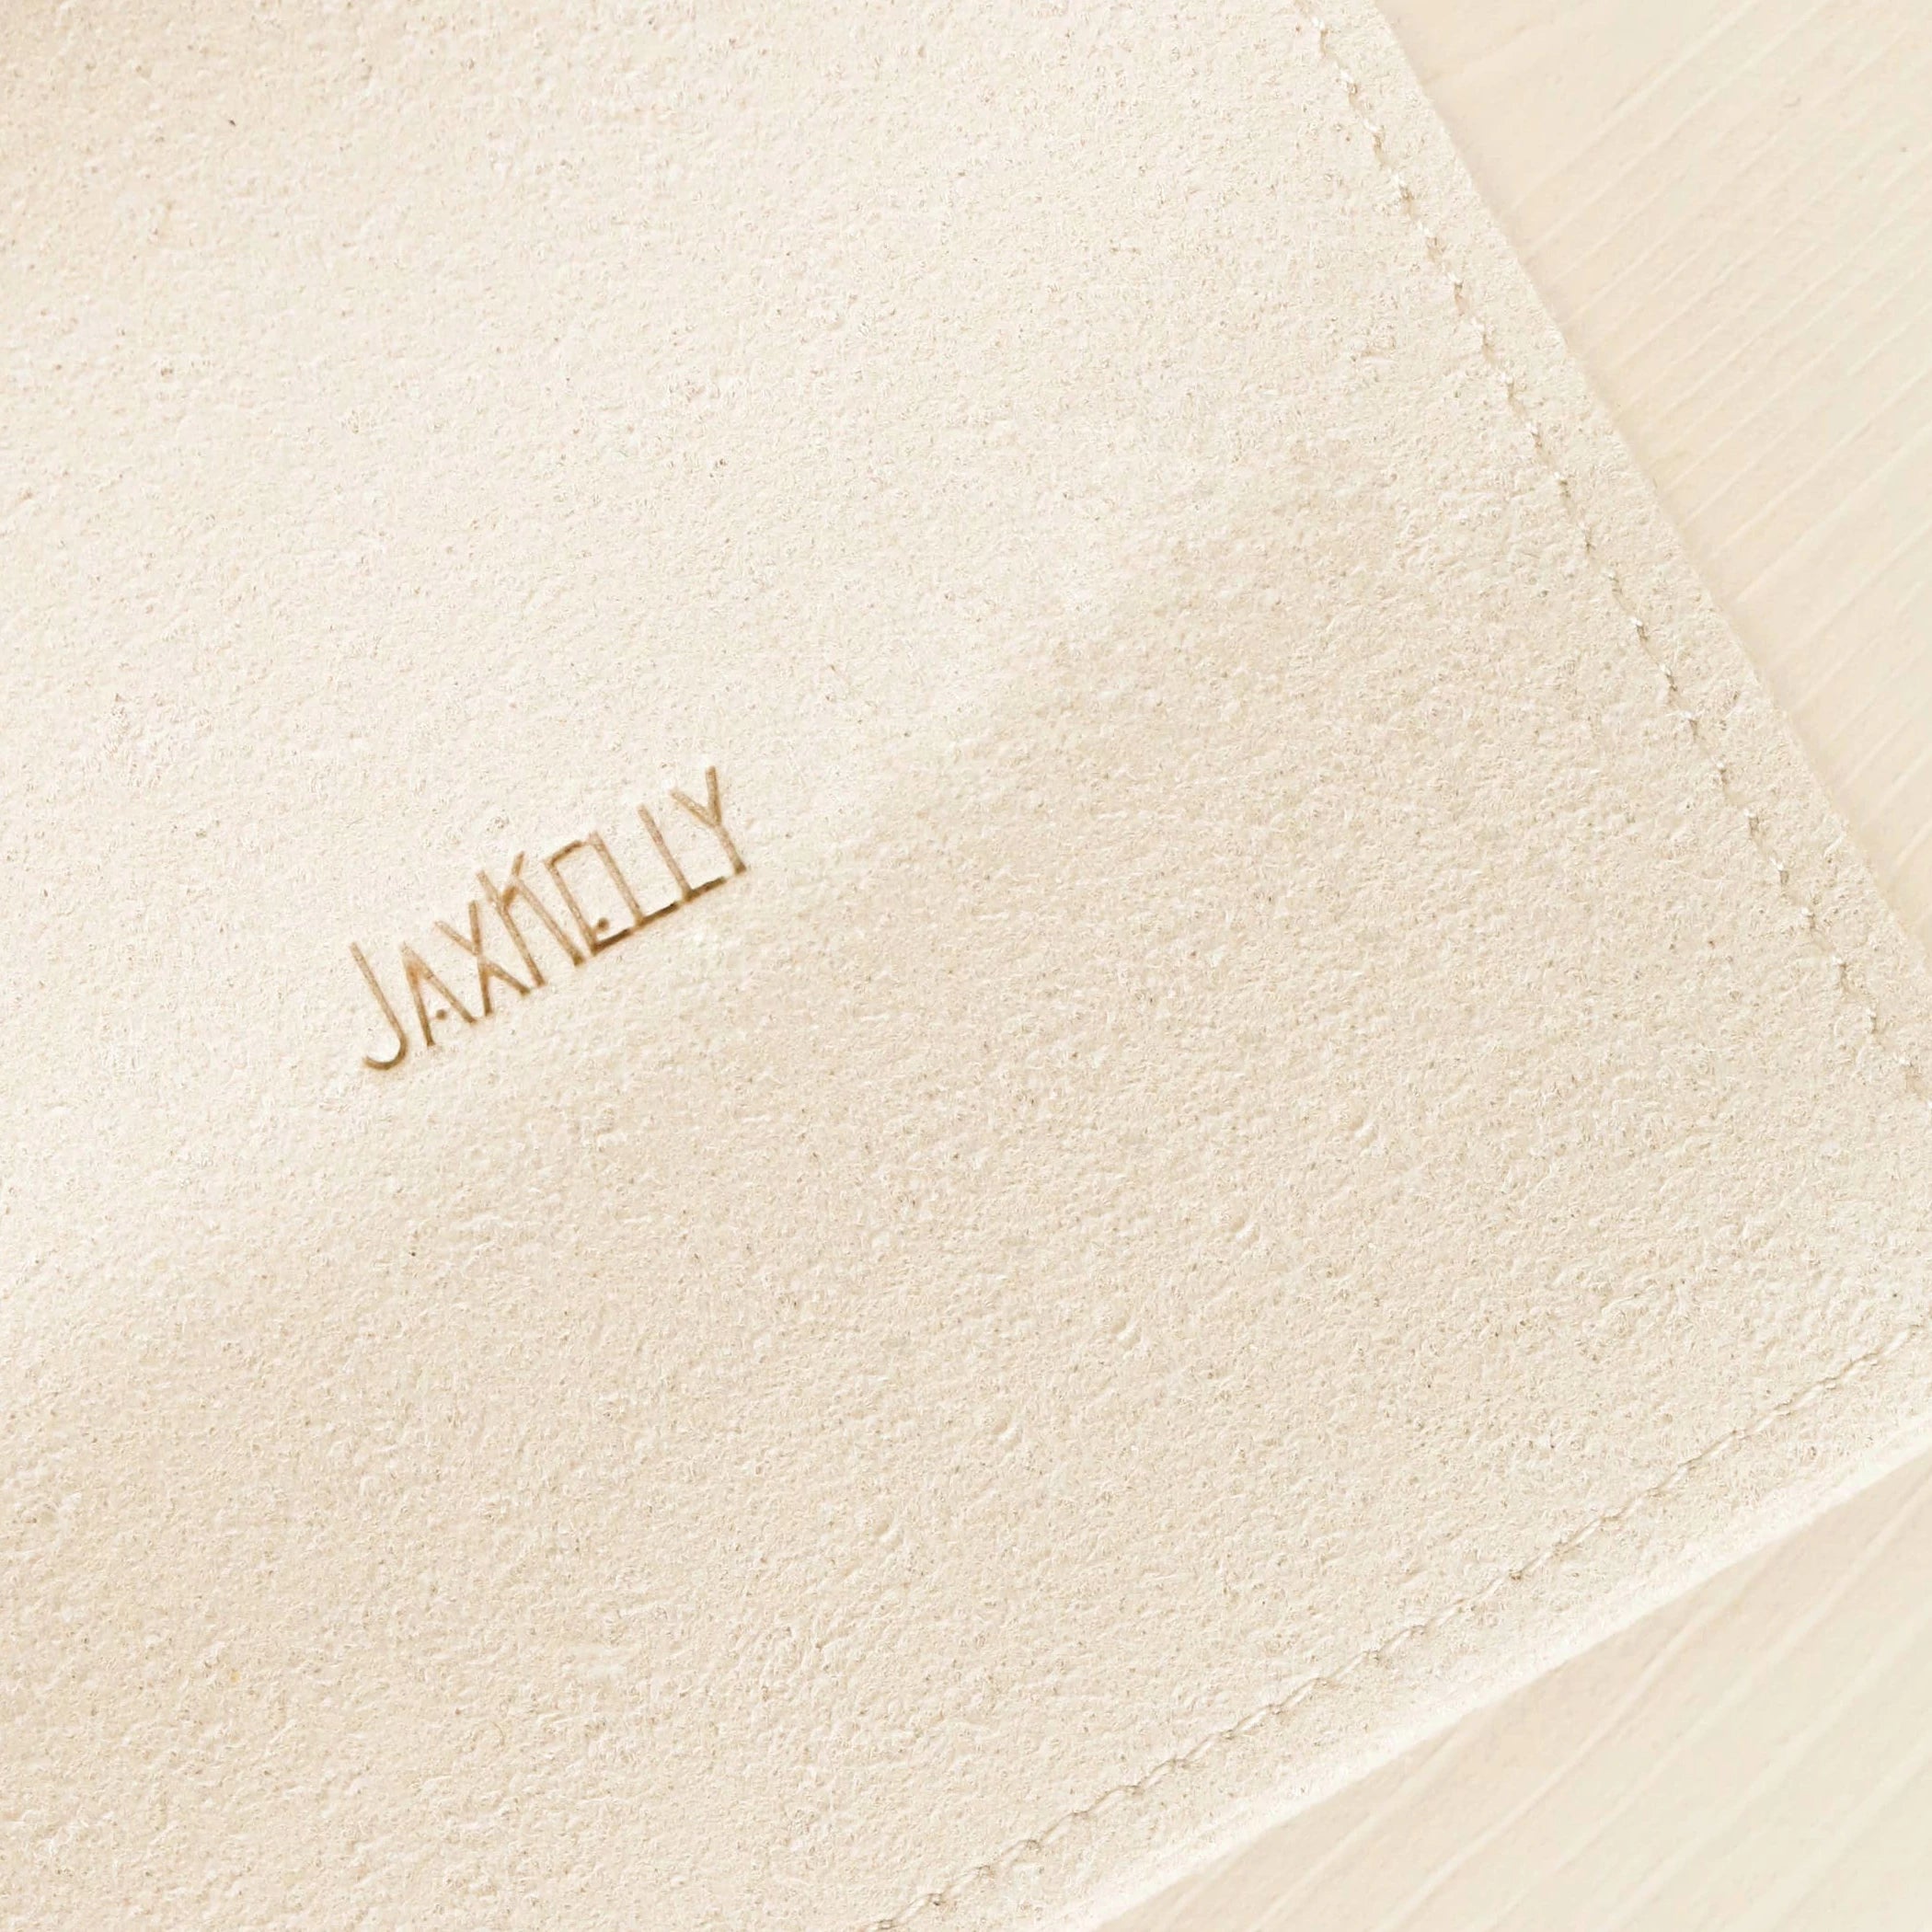 Close up view of the fabric of the JaxKelly suede-feel jewelry pouch in a cream color.